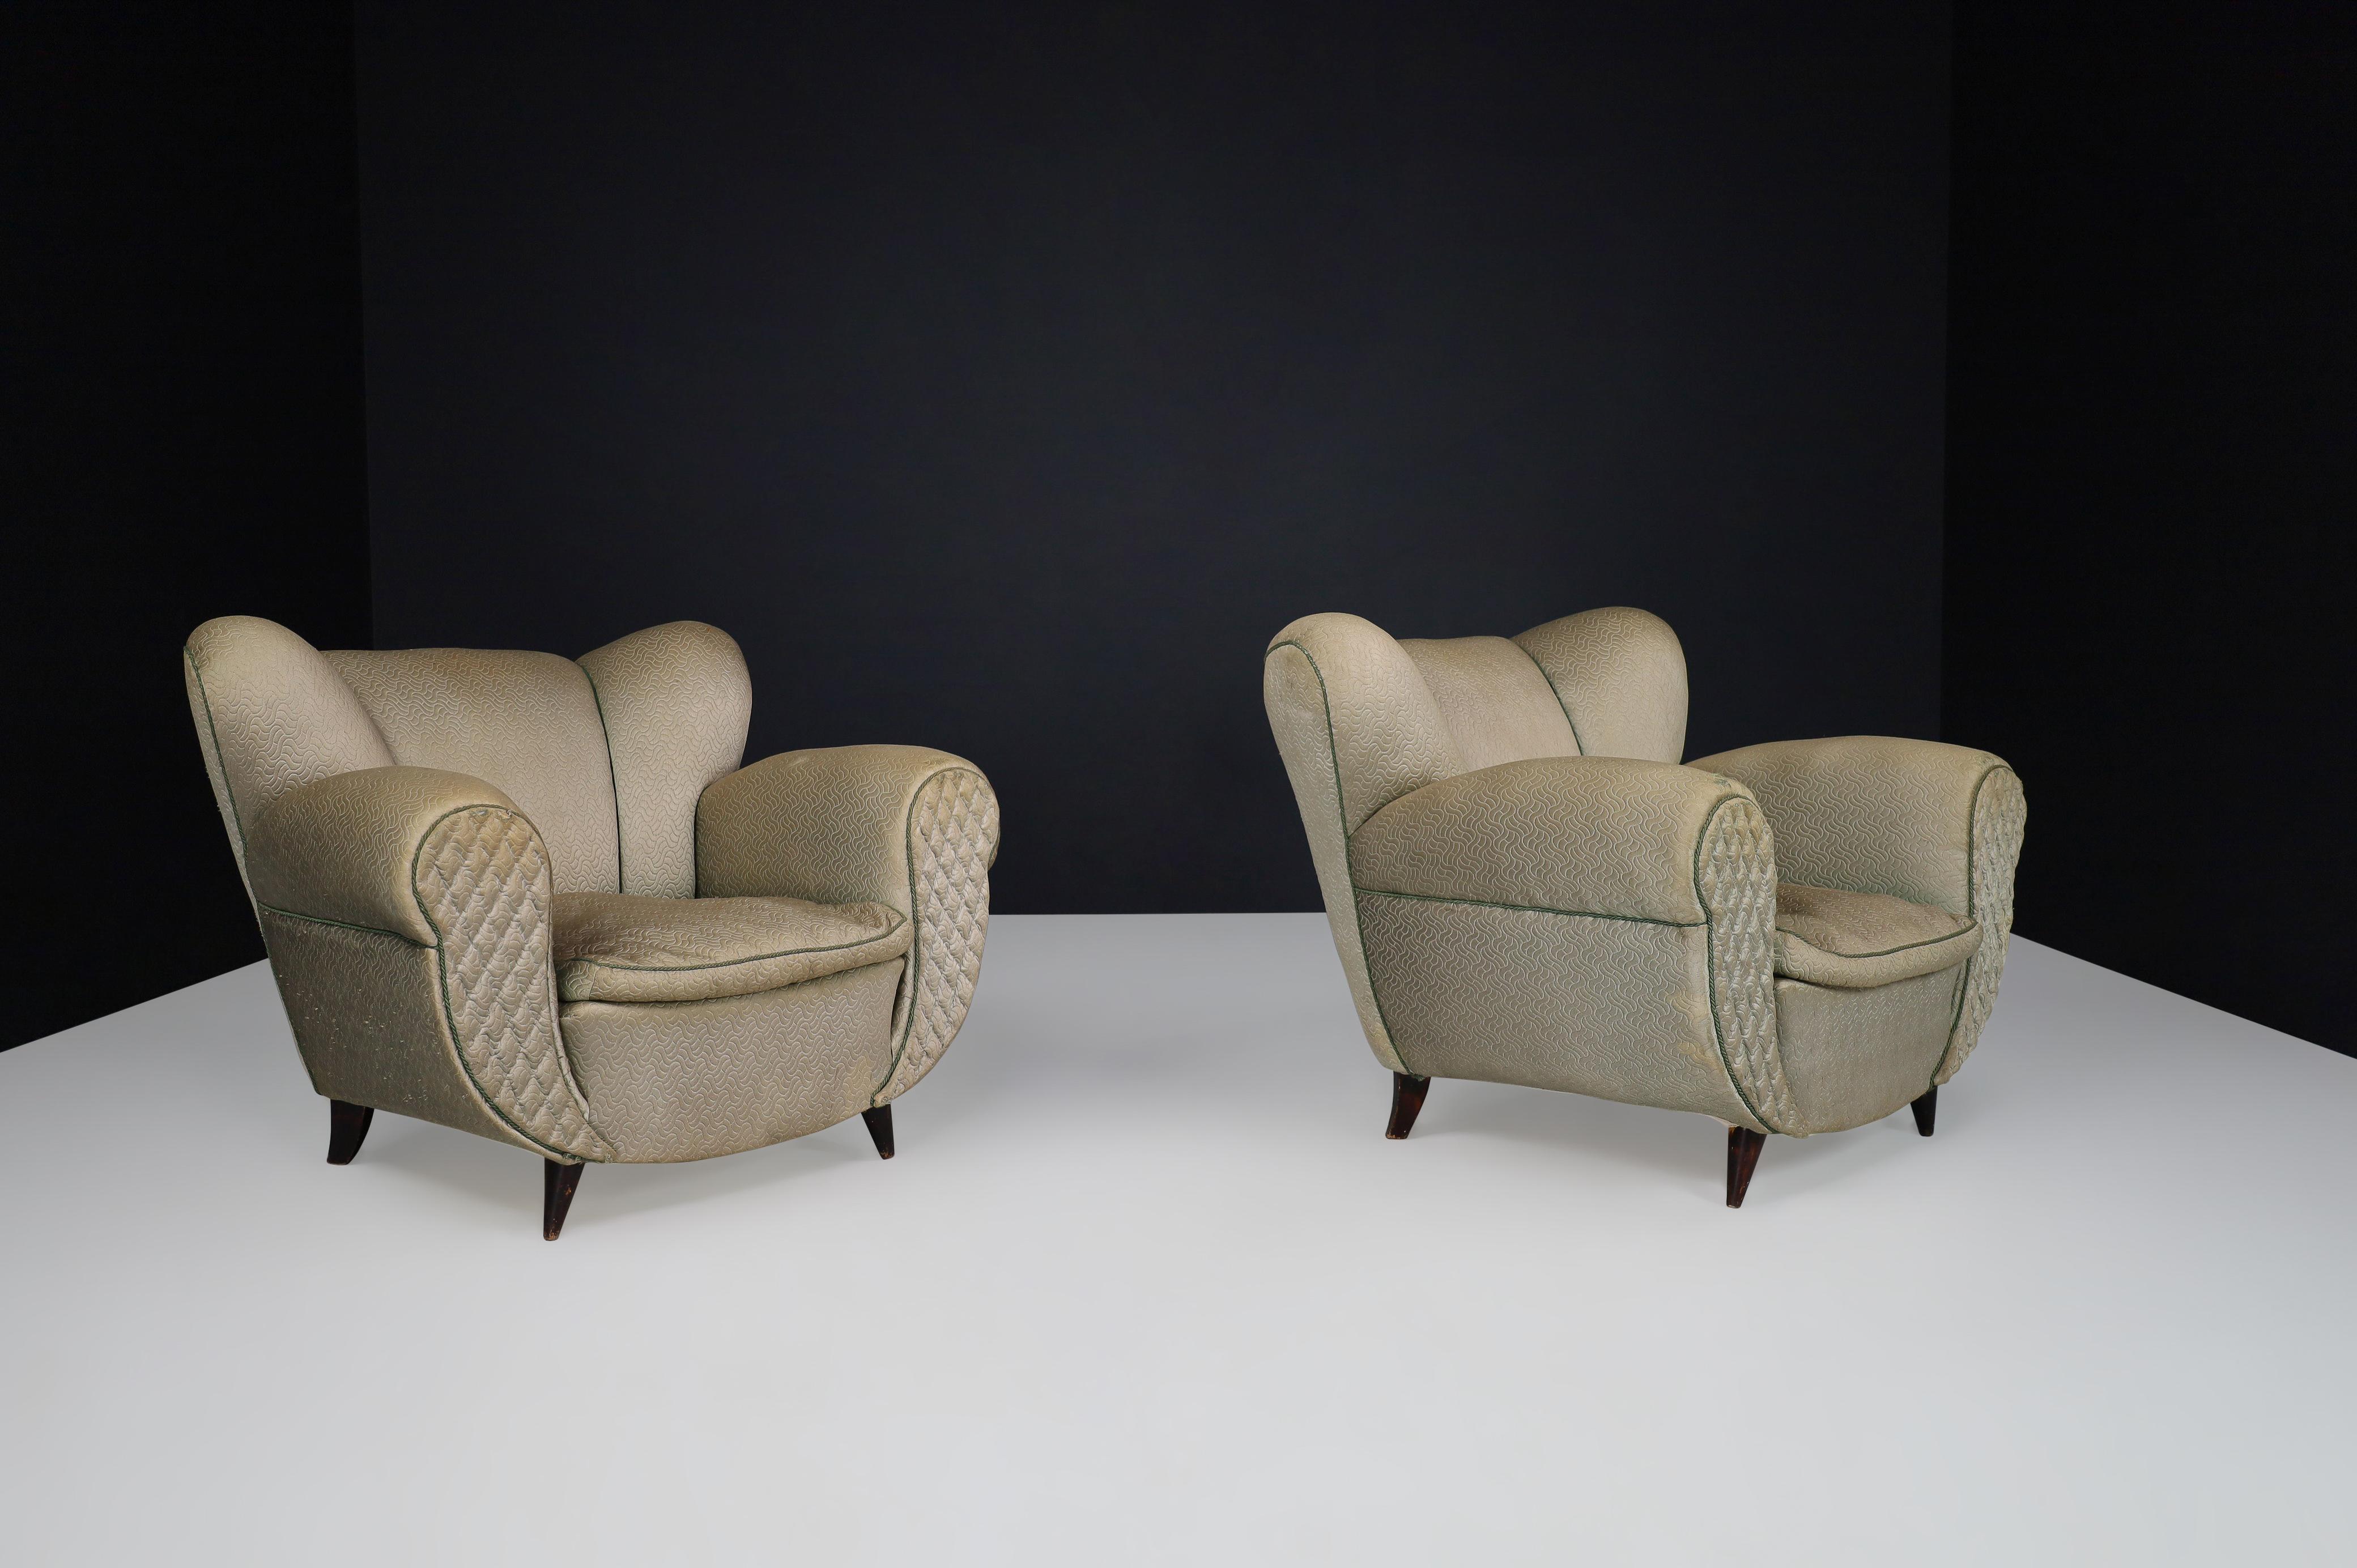 Guglielmo Ulrich Art Deco Lounge chairs in Original Fabric, Italy 1930s 

The famous architect Guglielmo Ulrich designed a pair of two lounge chairs in Art Deco style, a Production of the 1930s. Thanks to their elegant armrests and seating, these